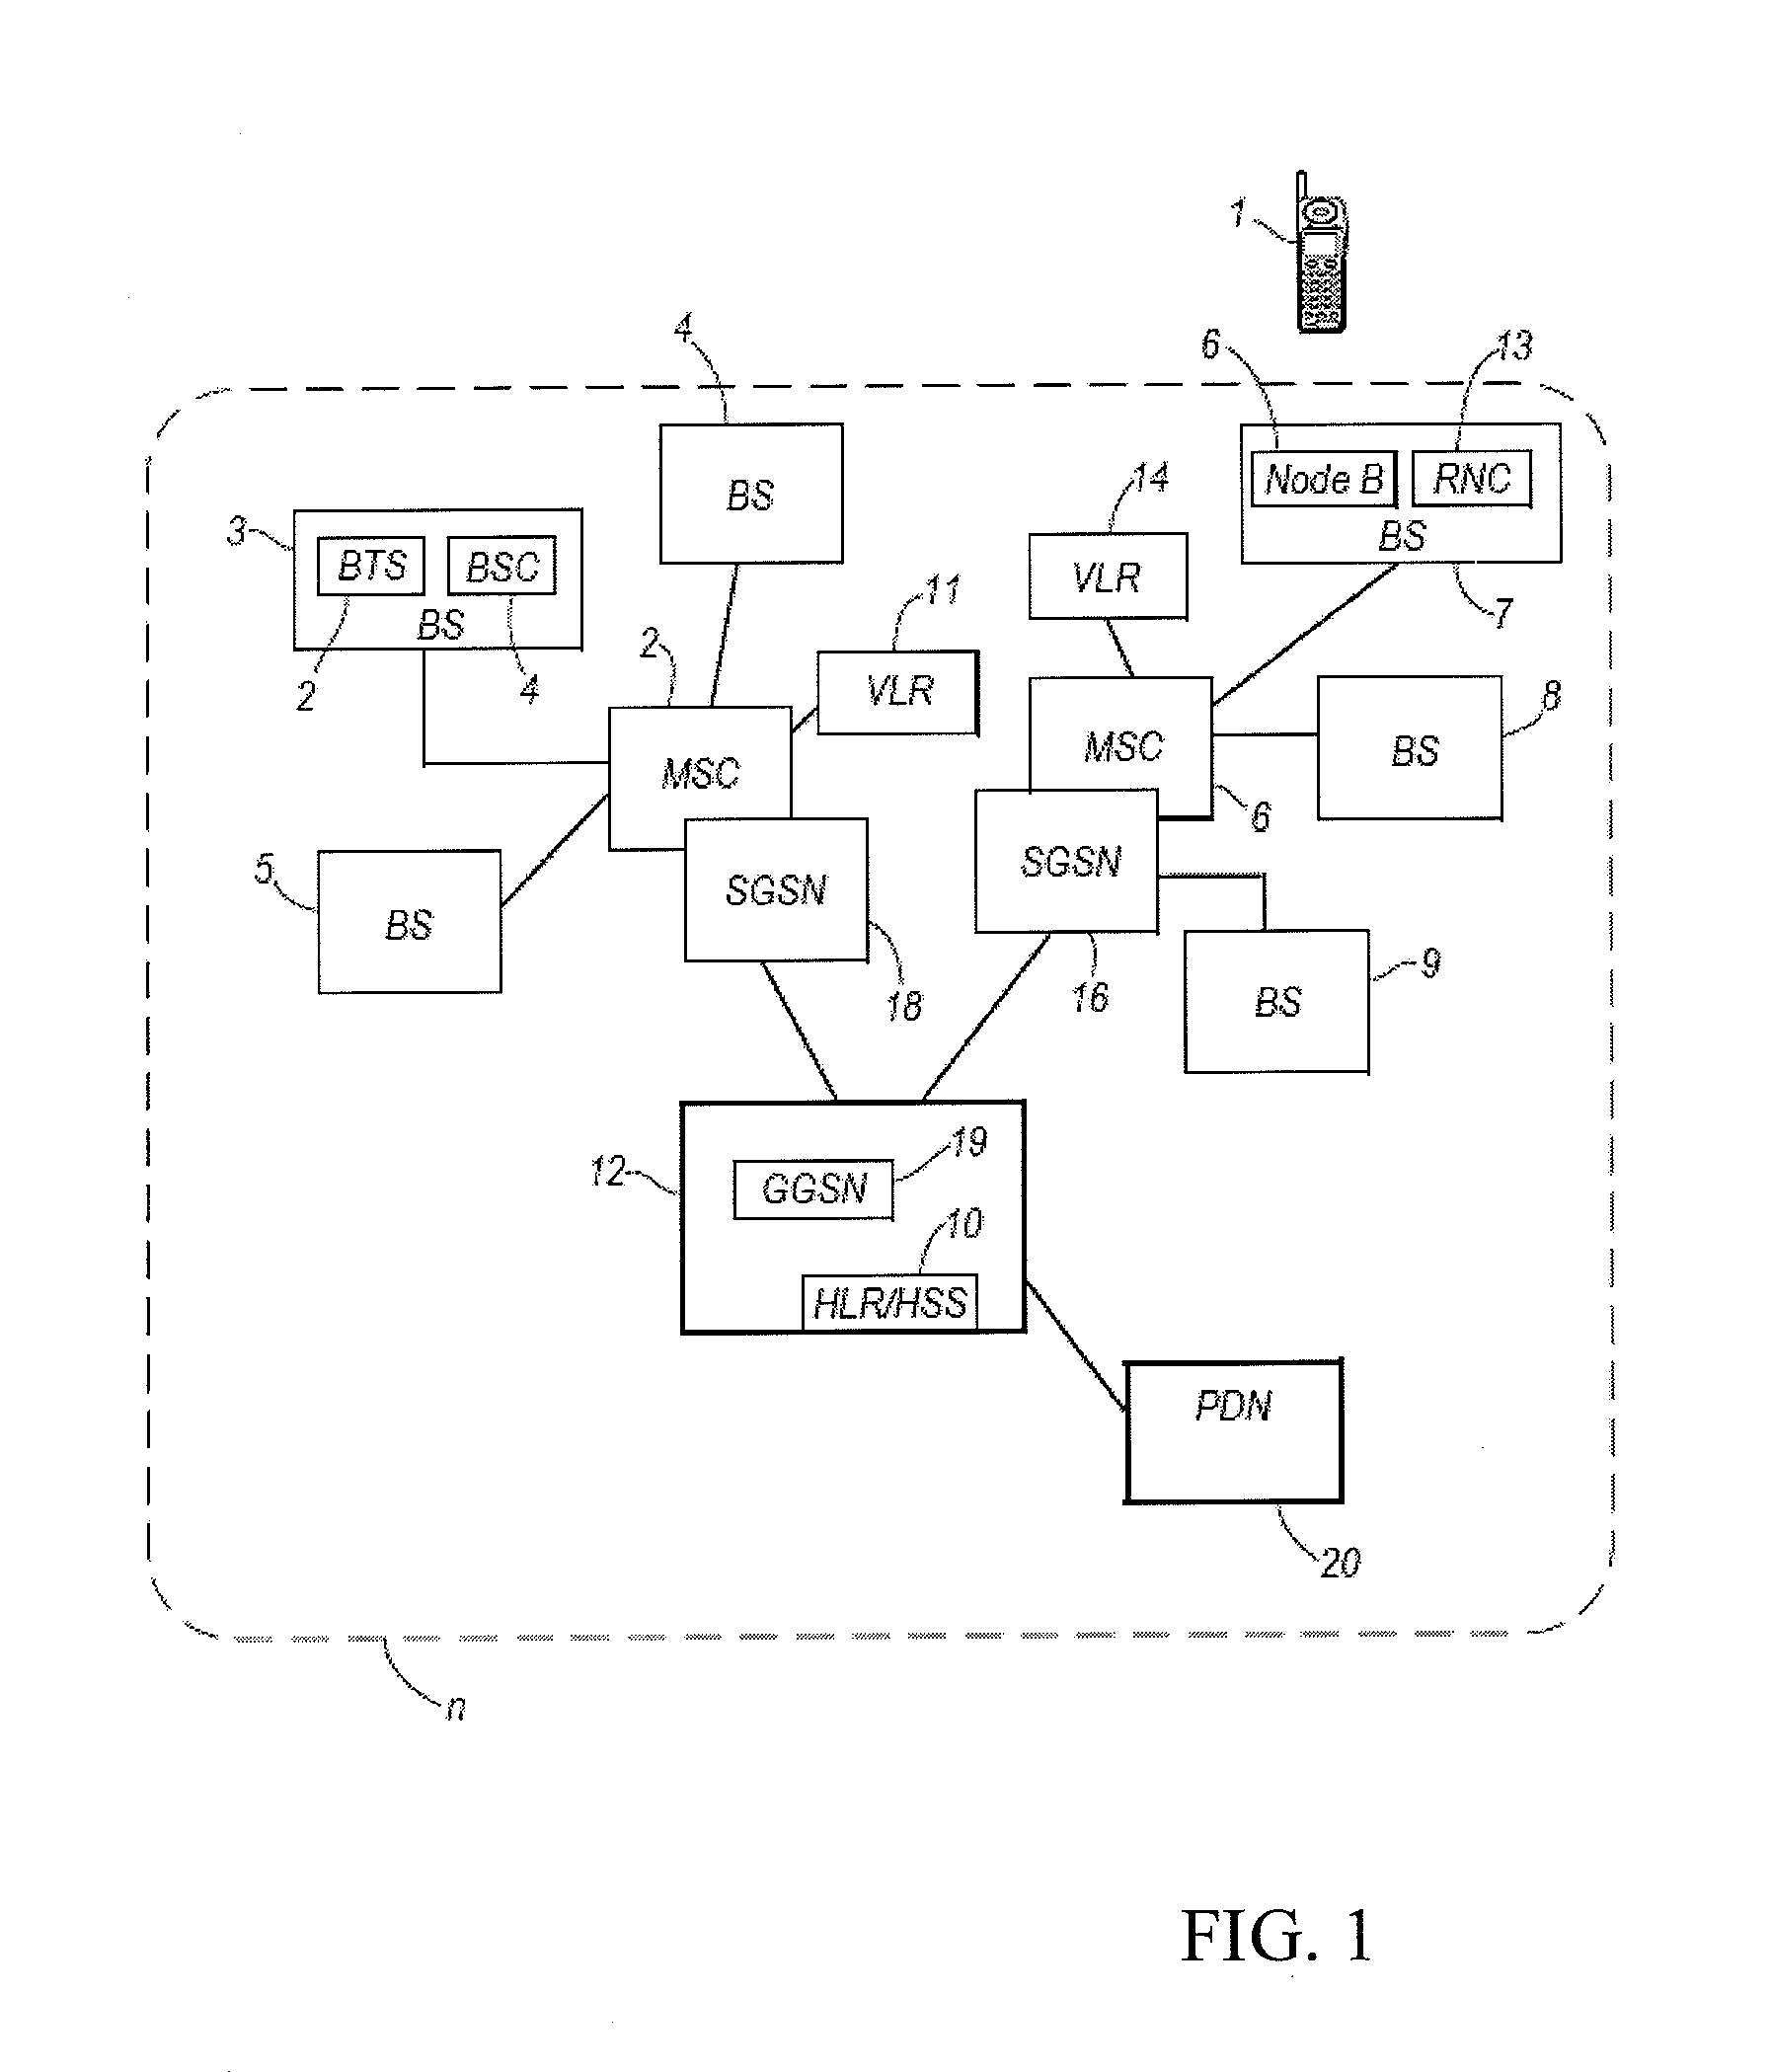 Radio coverage mapping for telecommunications network